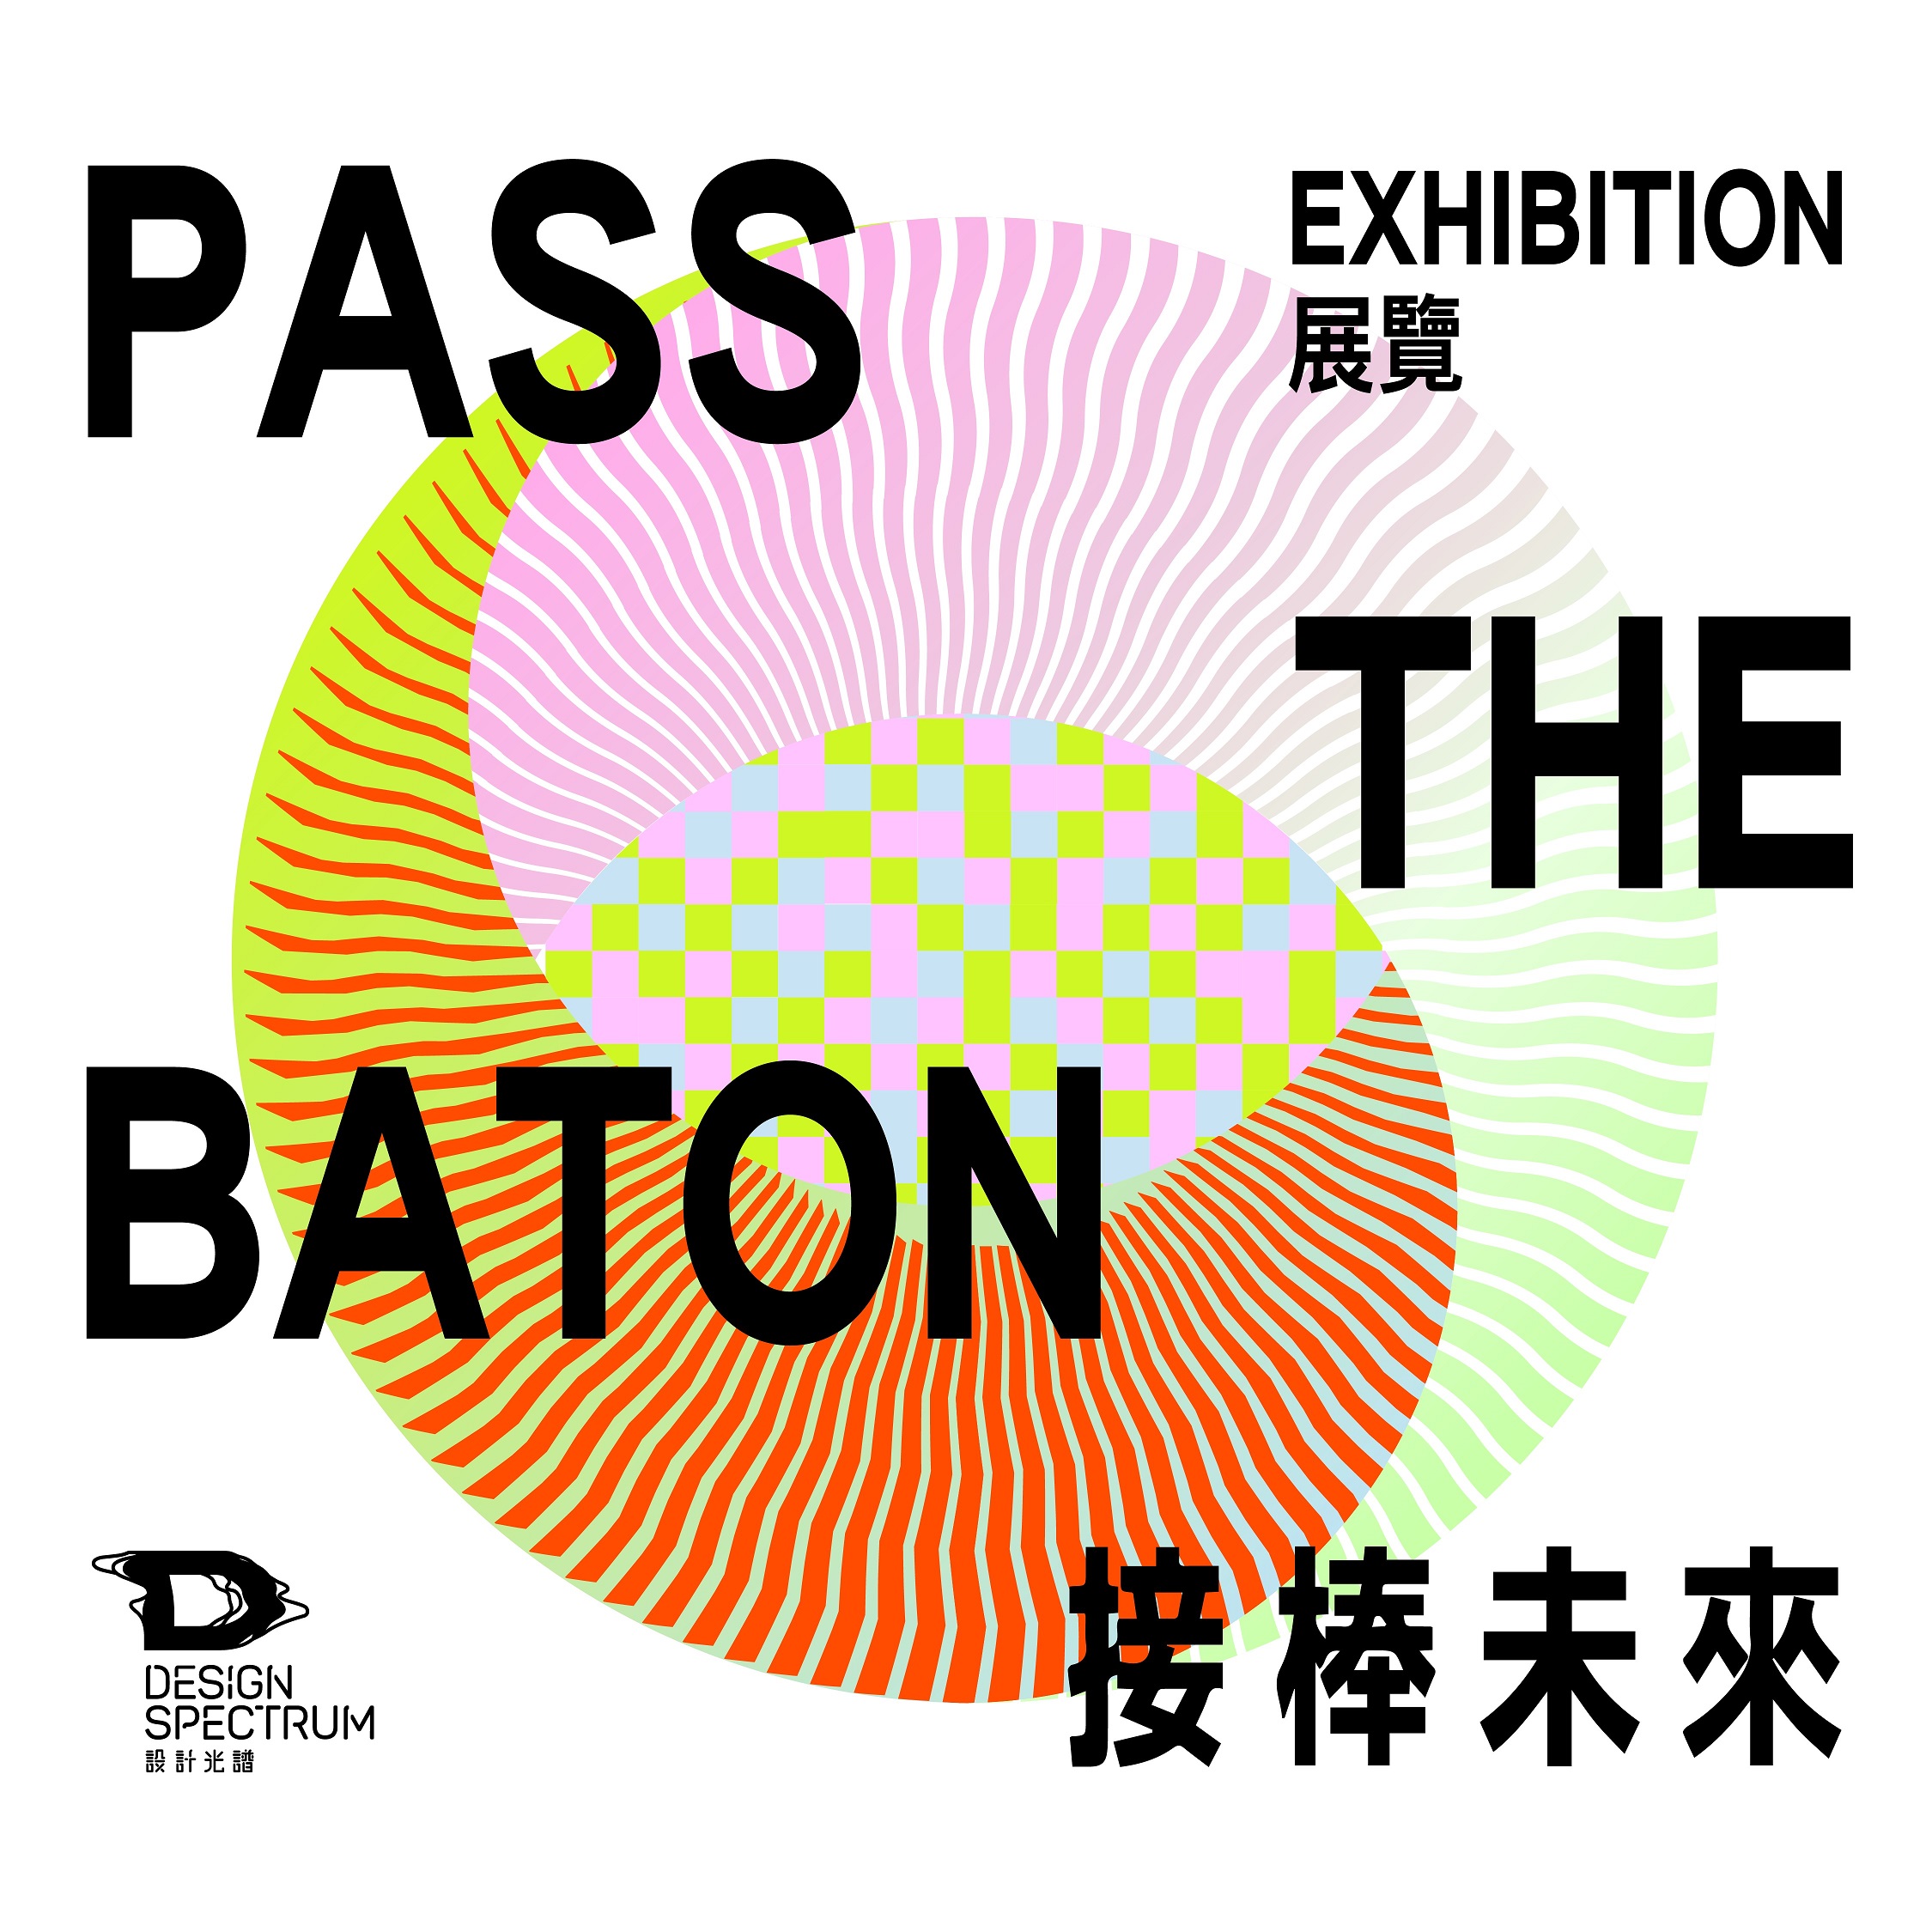 Design Spectrum of Hong Kong Design Centre Presents: ‘PASS THE BATON’      Part 1 of the Exhibition ‘FROM PASSING BY TO PASSING ON’ To Unveil the Prologue